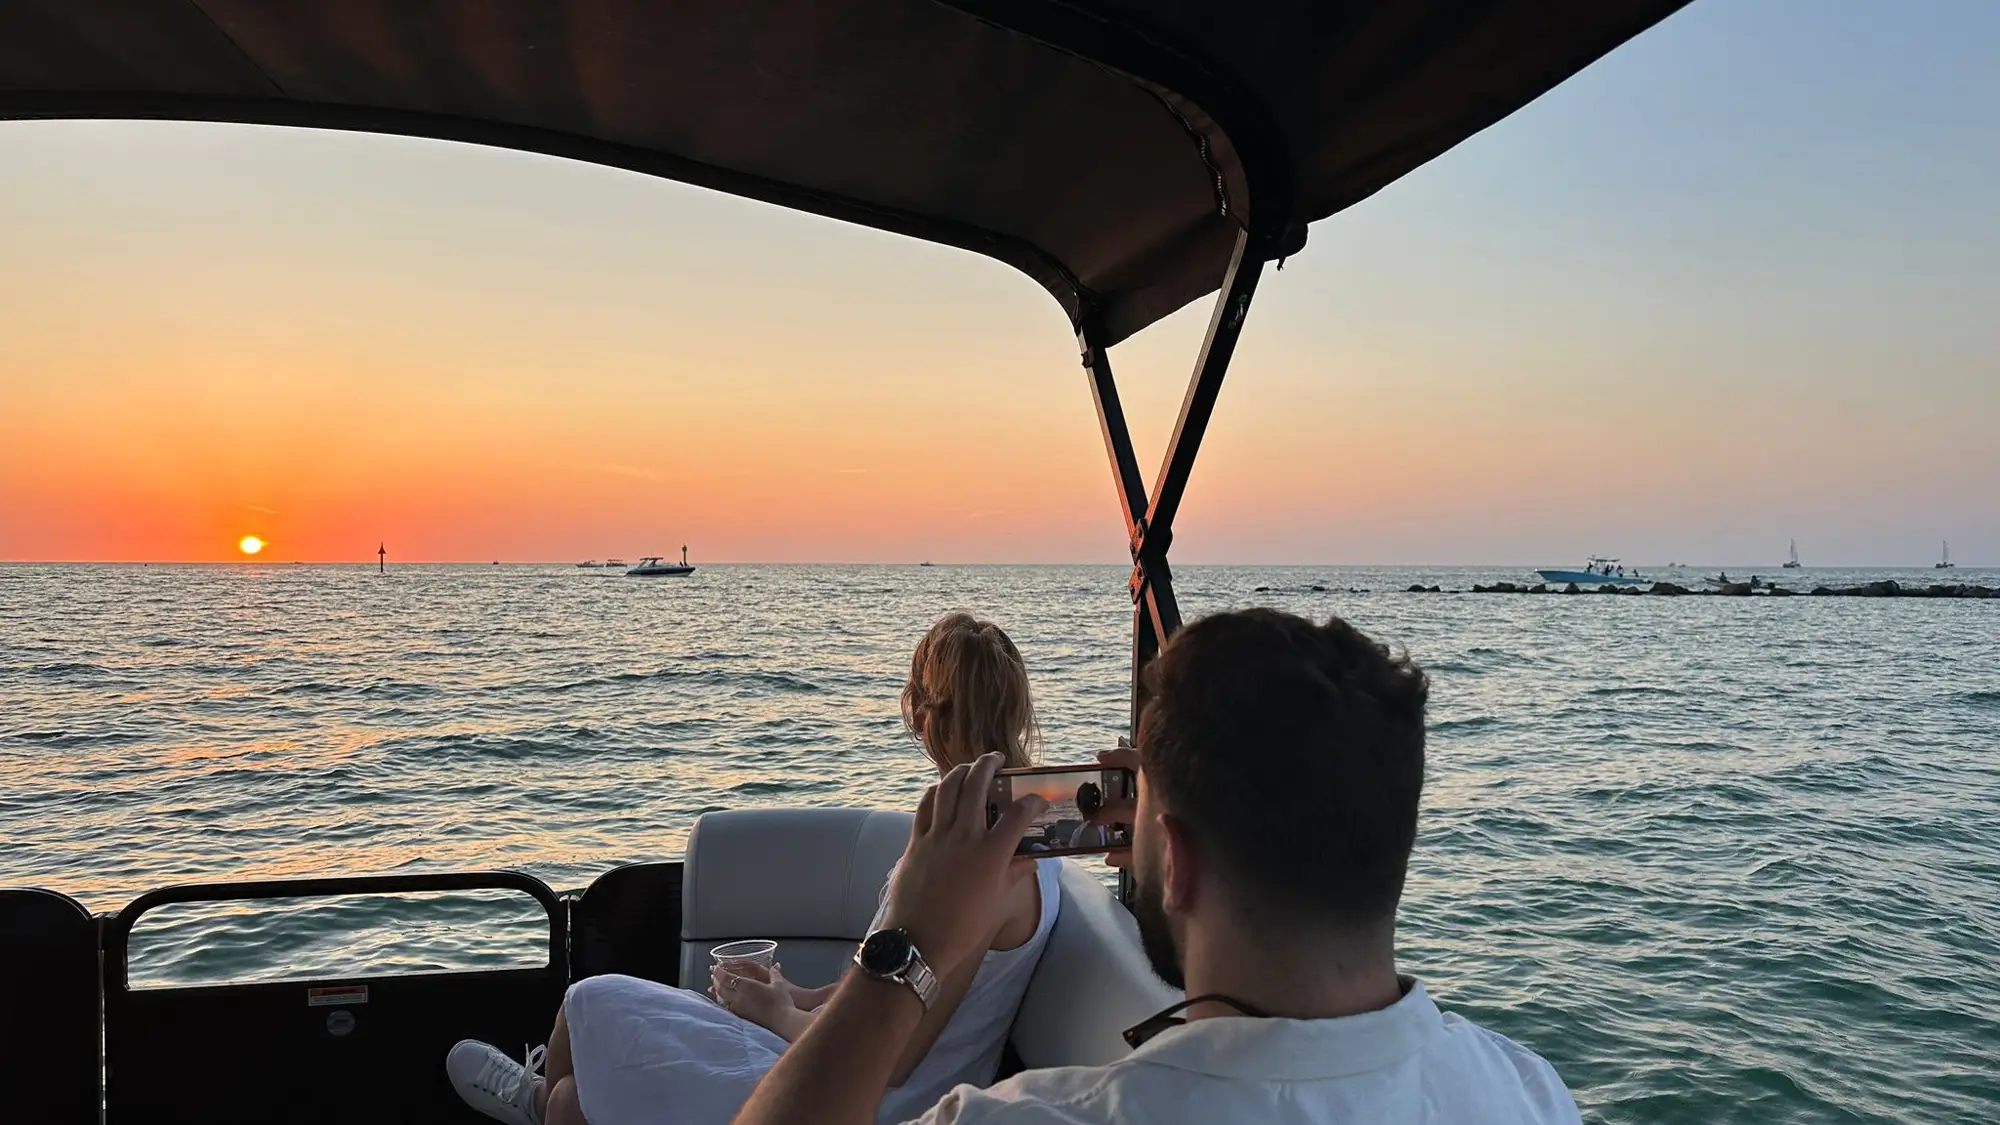 Couple on Naples Cruise viewing sunset